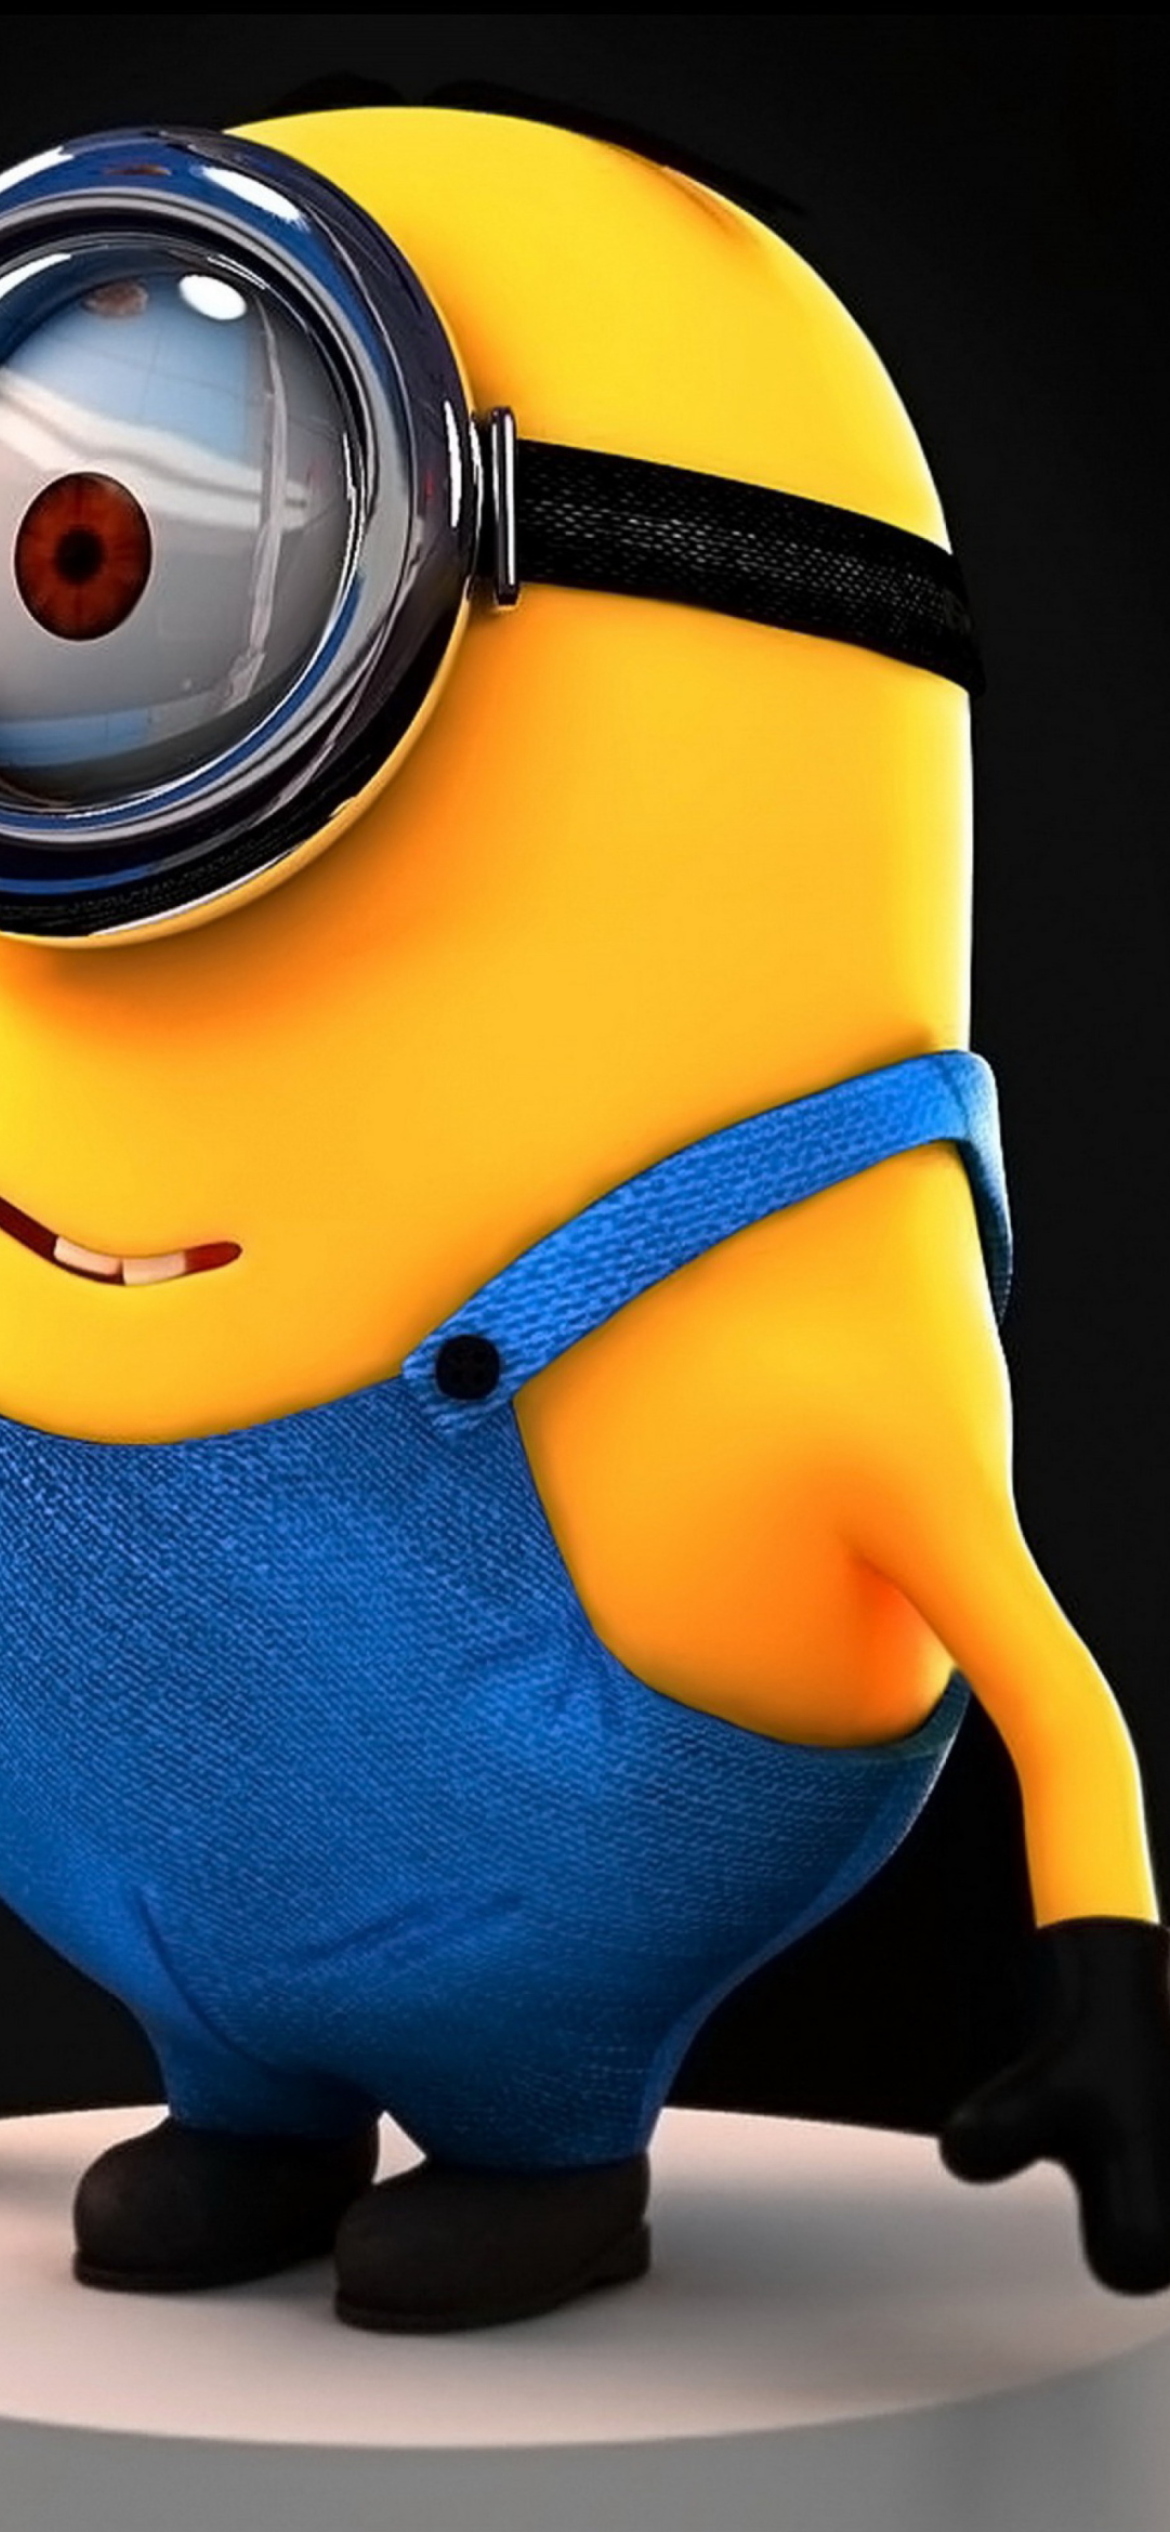 Minion Wallpaper for iPhone 11 Pro